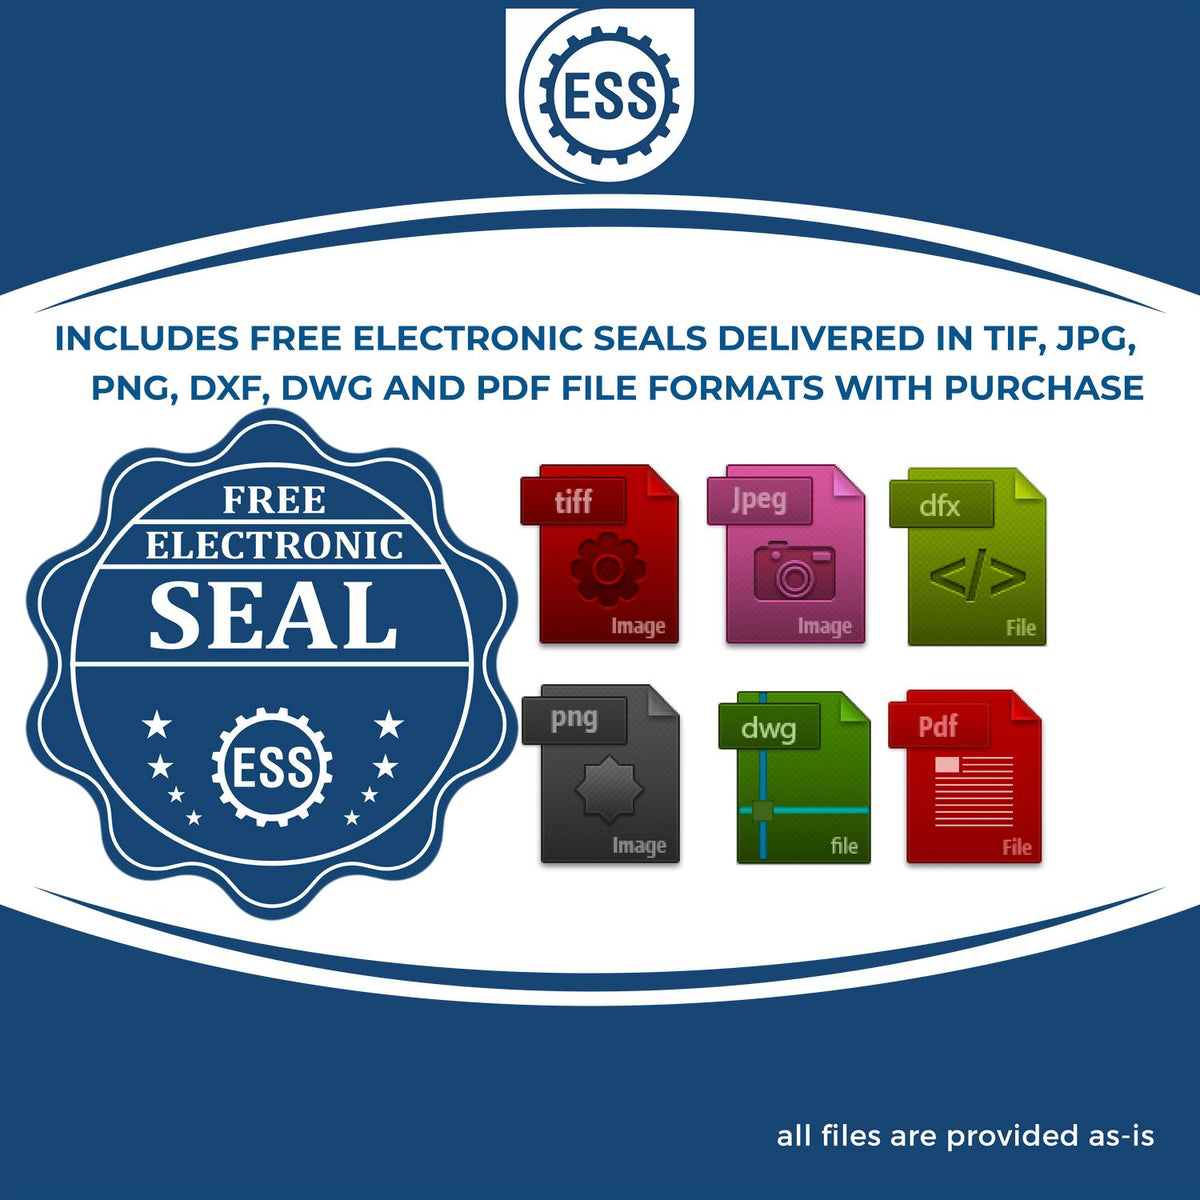 An infographic for the free electronic seal for the Hybrid Montana Landscape Architect Seal illustrating the different file type icons such as DXF, DWG, TIF, JPG and PNG.